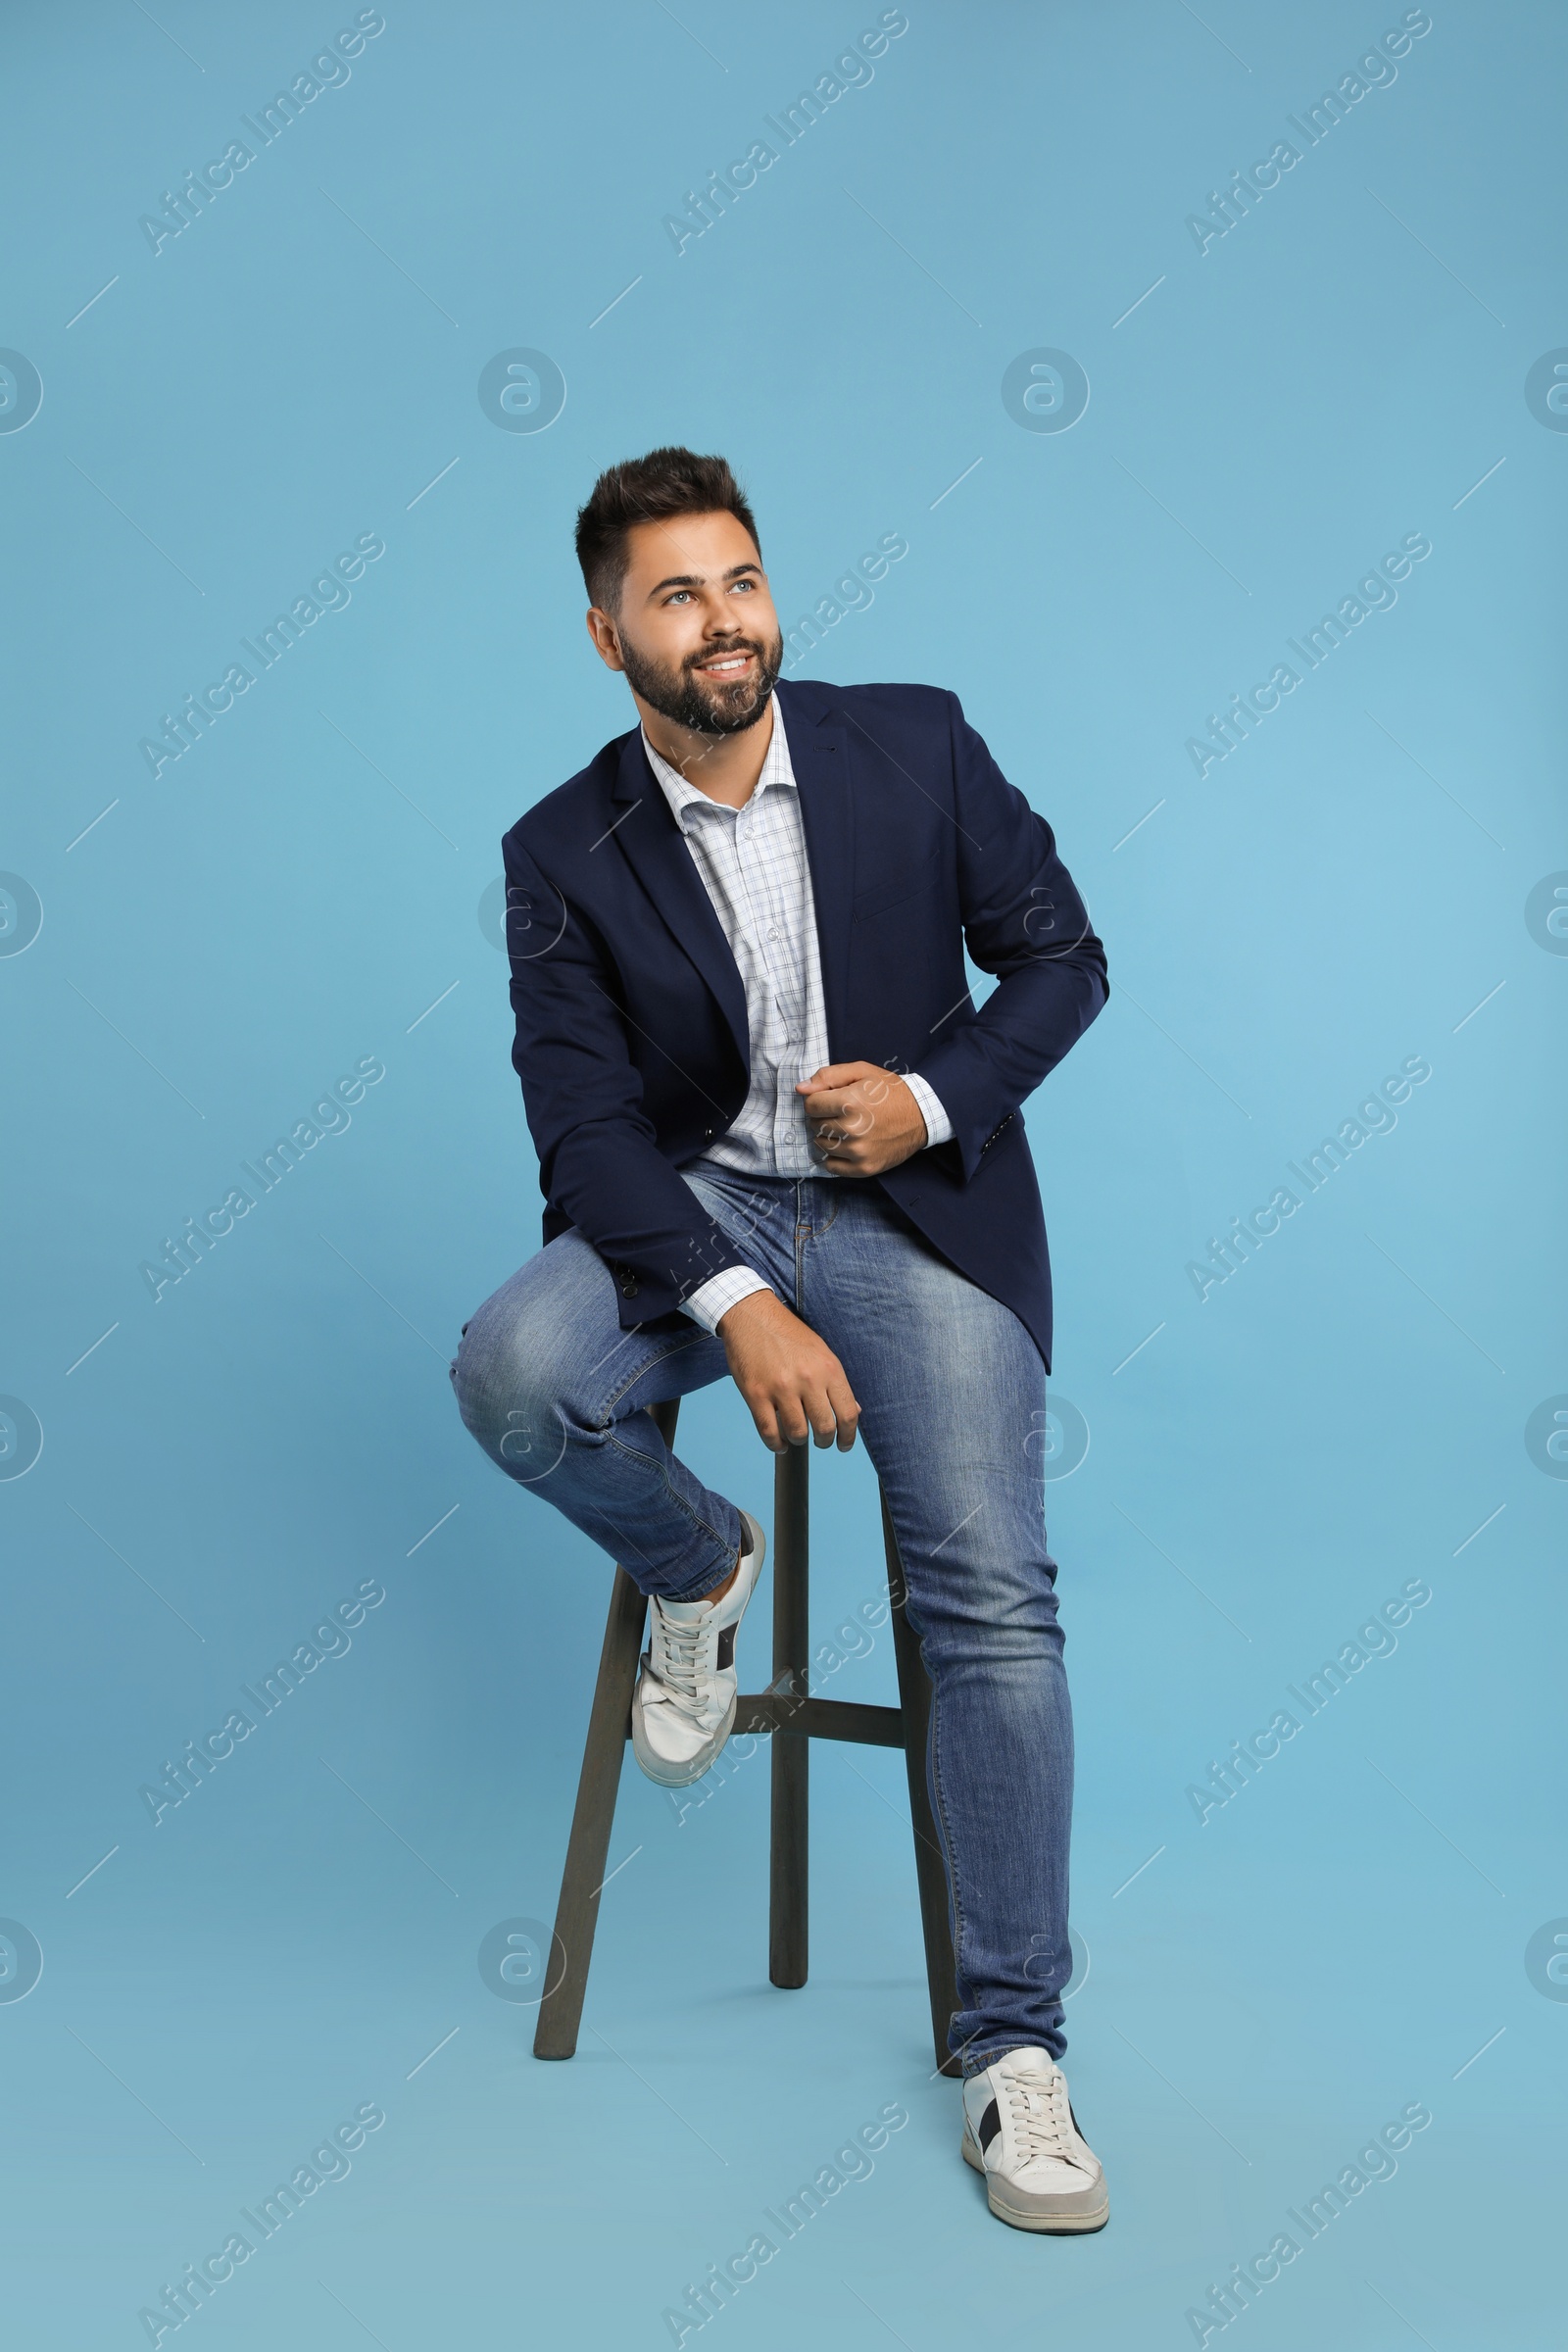 Photo of Handsome young man sitting on stool against turquoise background